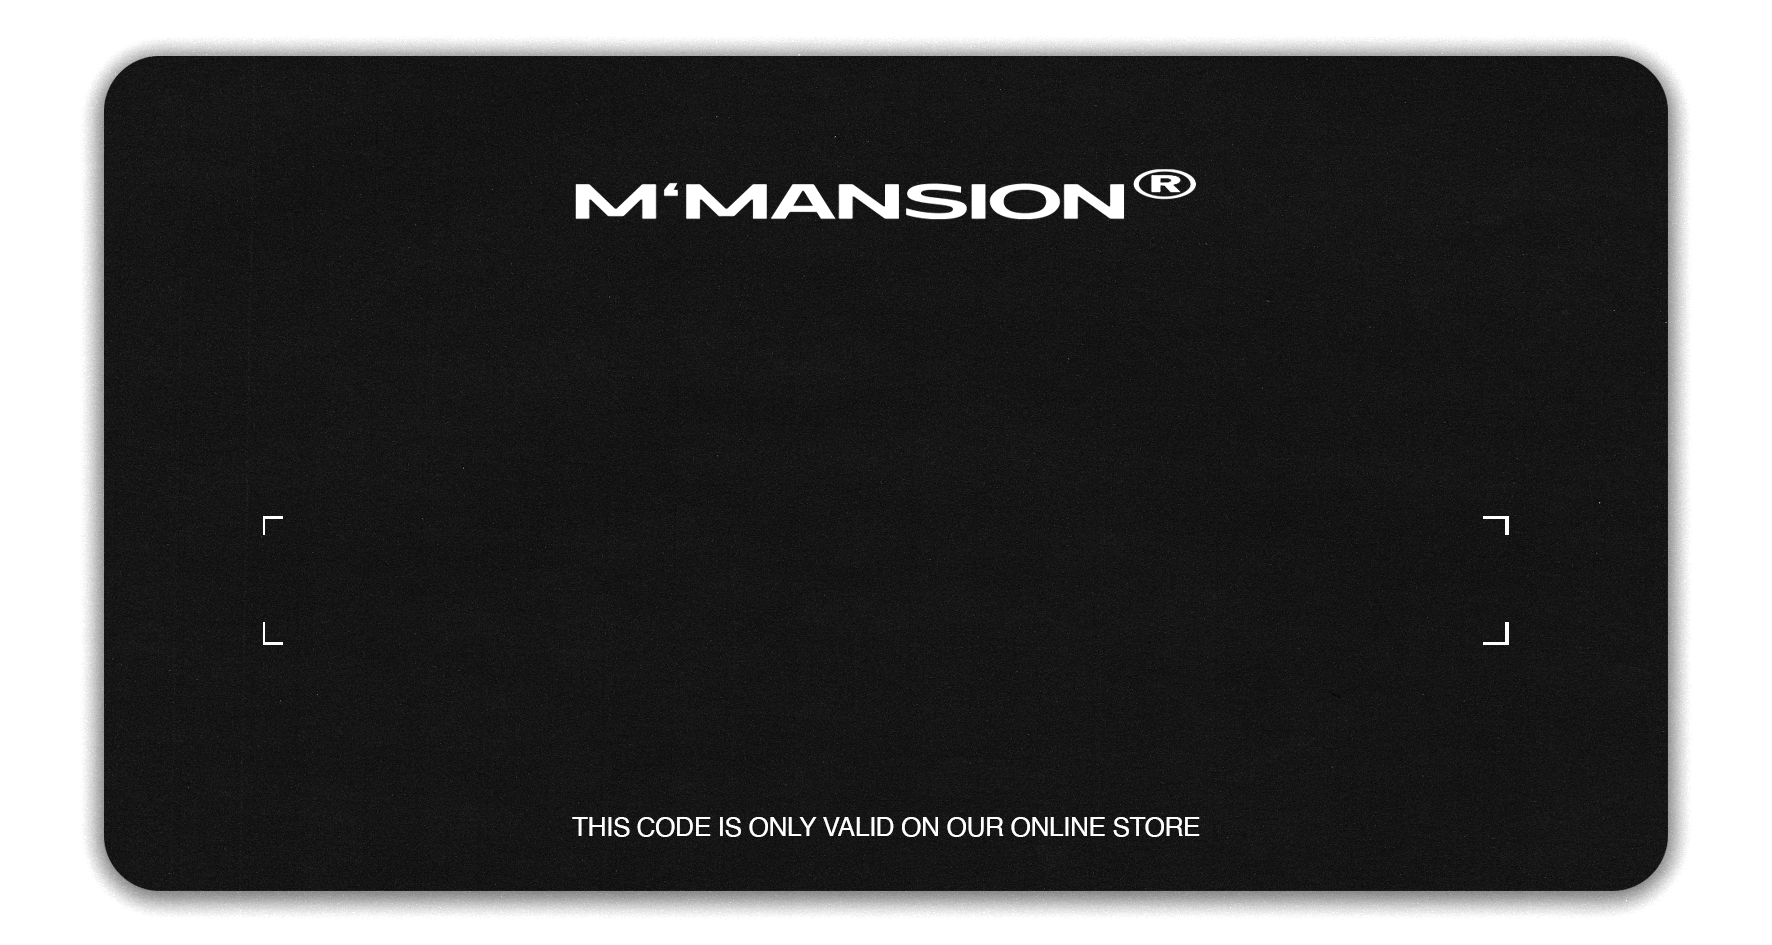 M'MANSION GIFTCARD